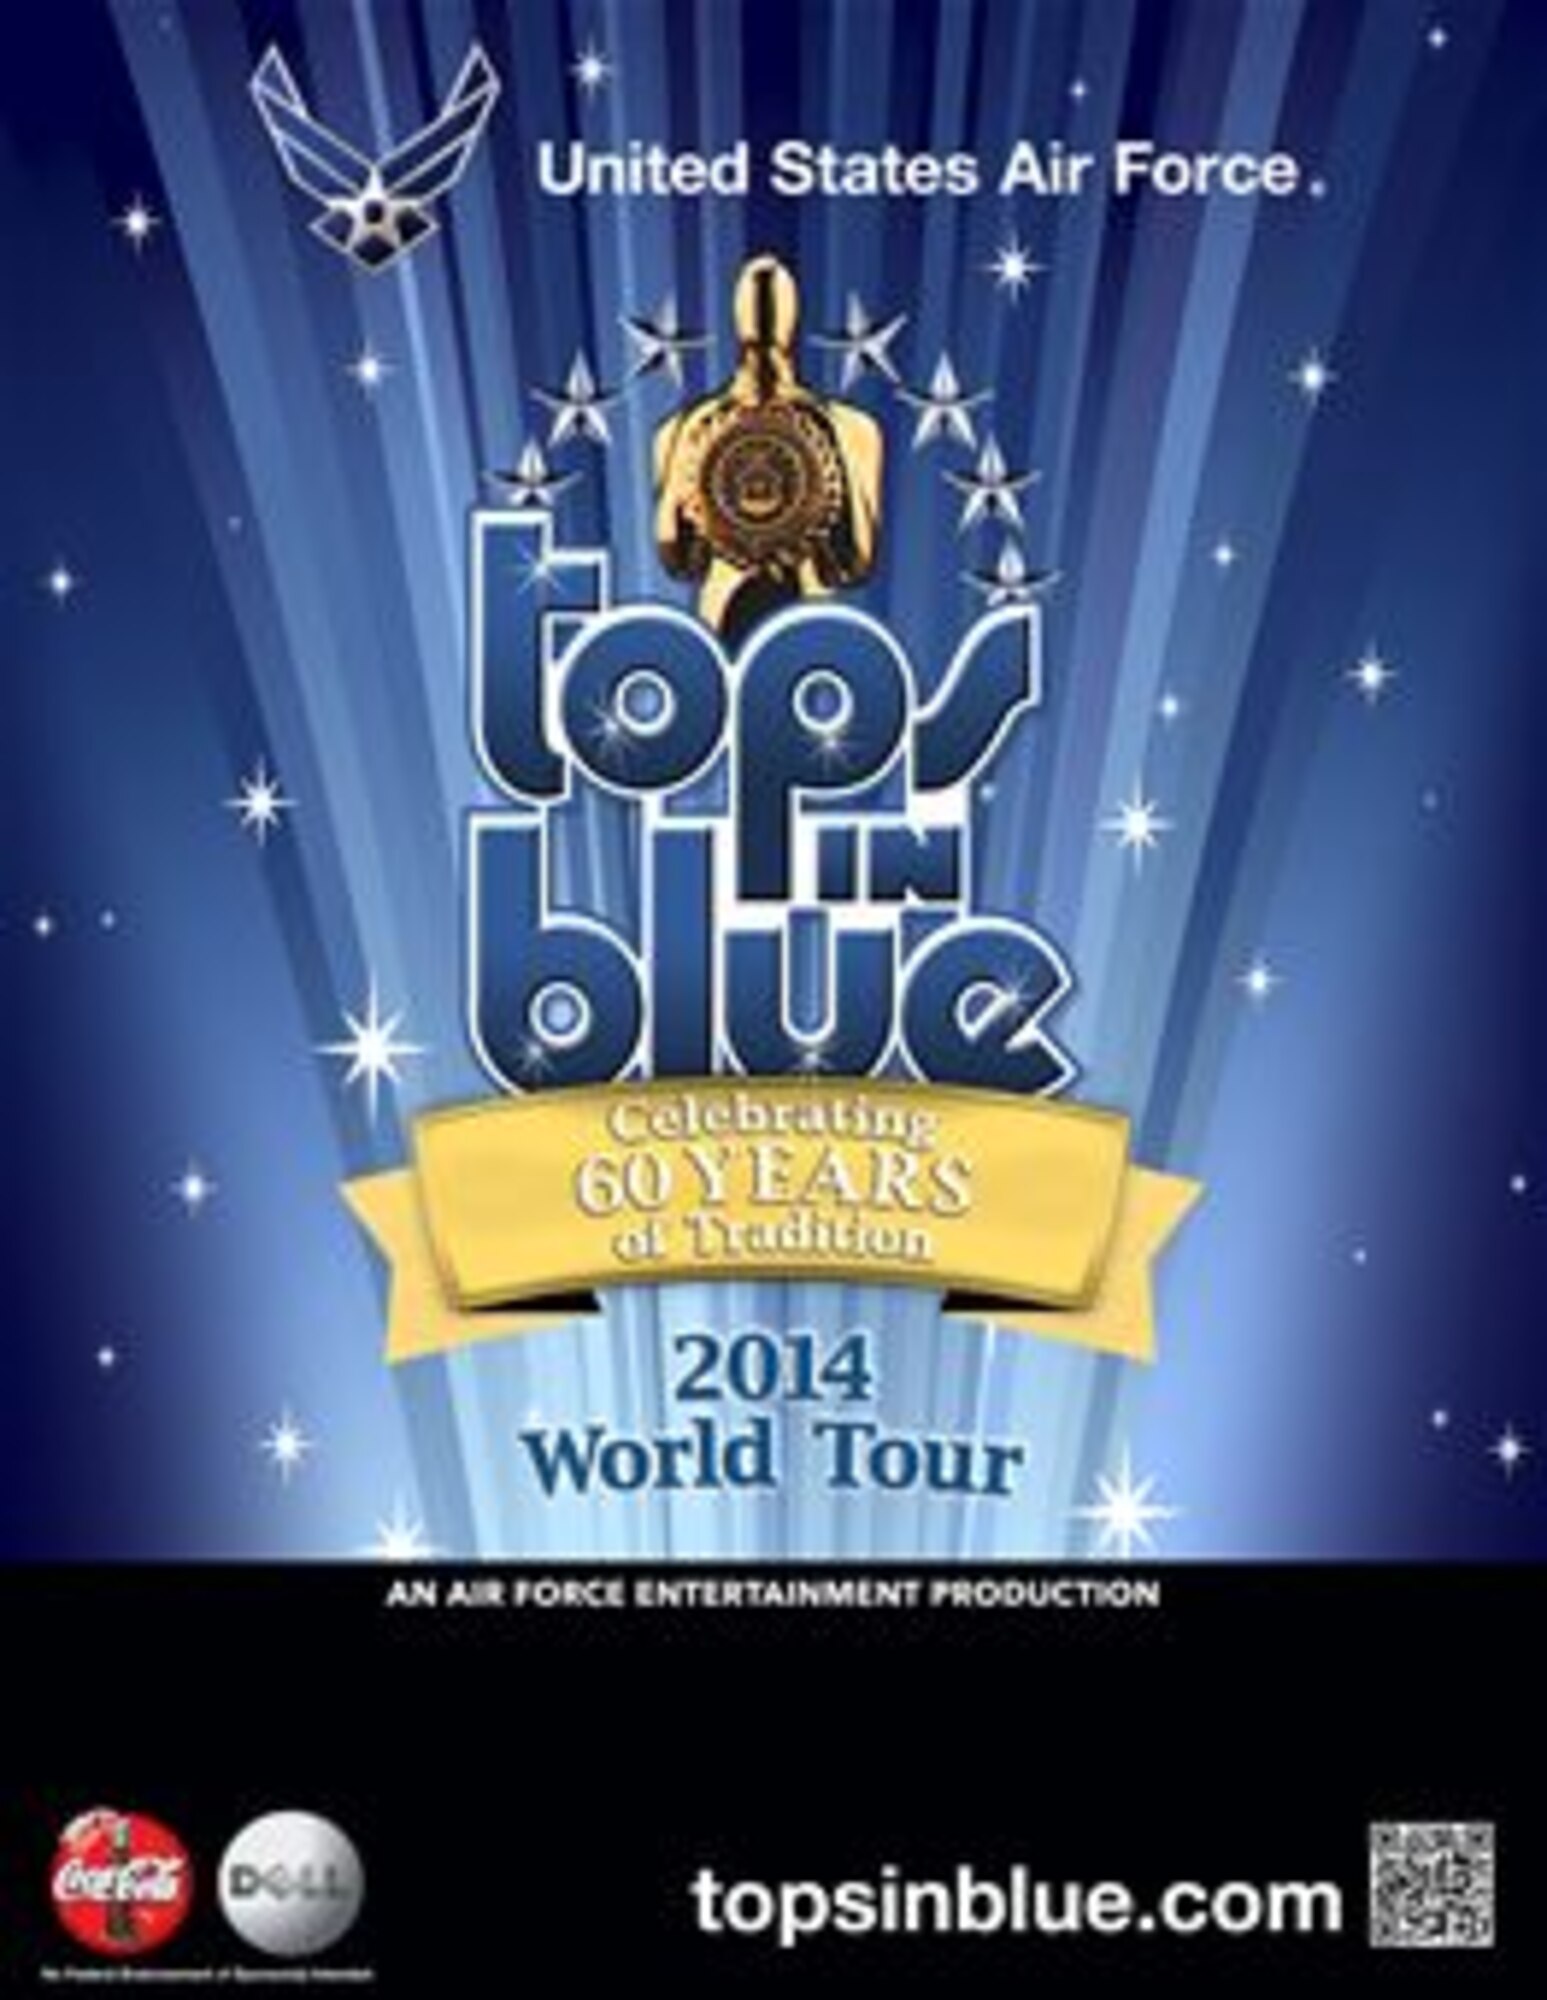 Tops In Blue is coming Aug. 28, 2014 to the Memorial Auditorium in Wichita Falls, Texas.  Admission is free and the doors open at 6:30 p.m. with the show starting at 7 p.m.